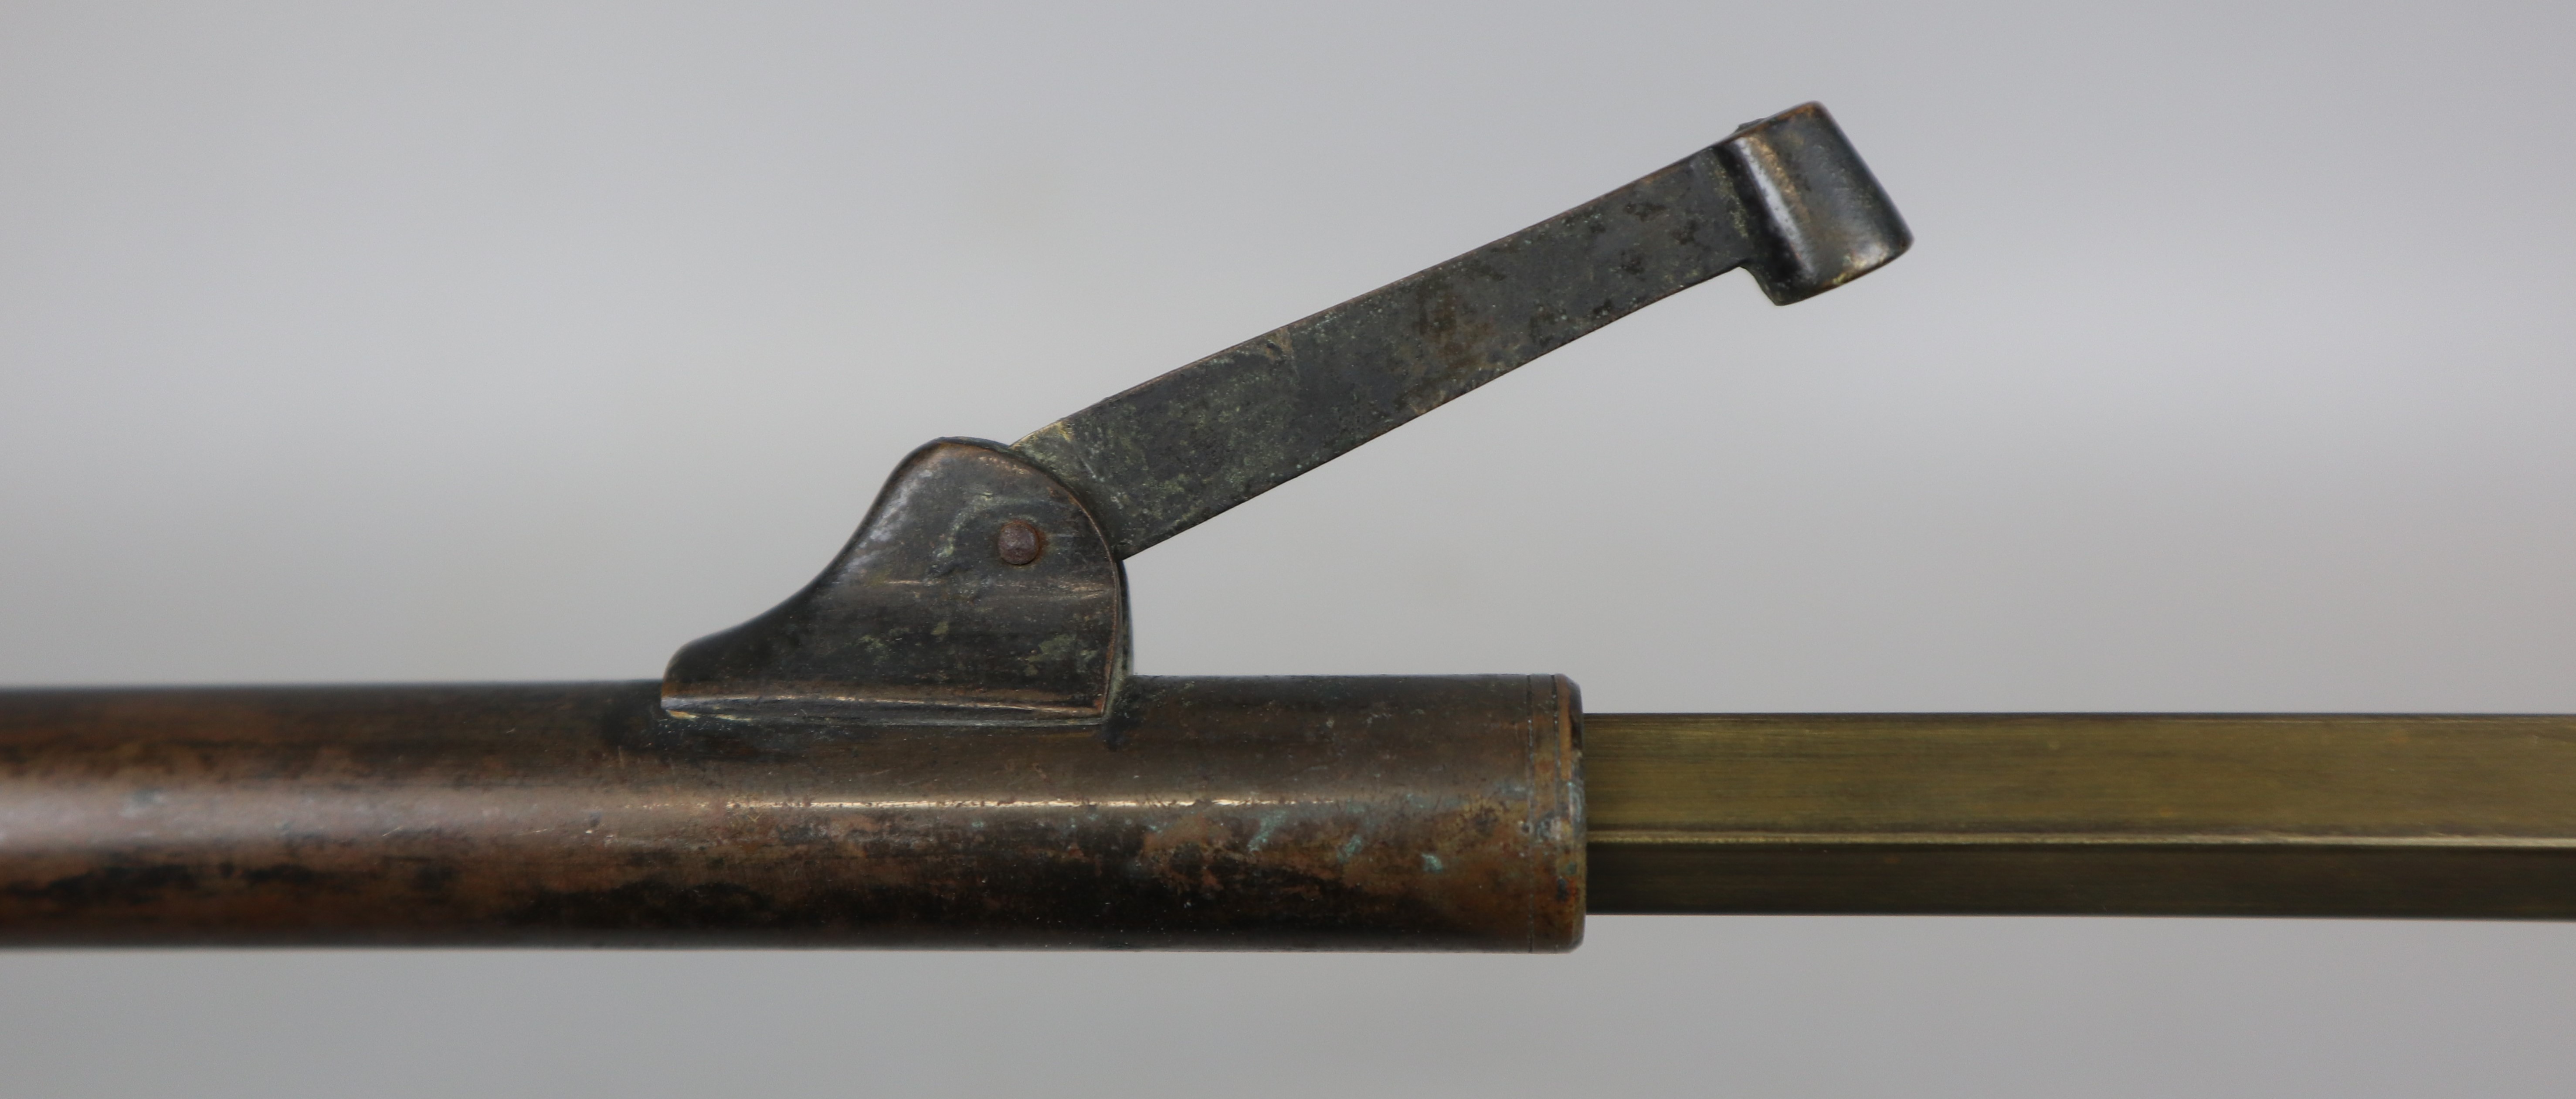 Antique telescopic fishing gaff - Image 5 of 6